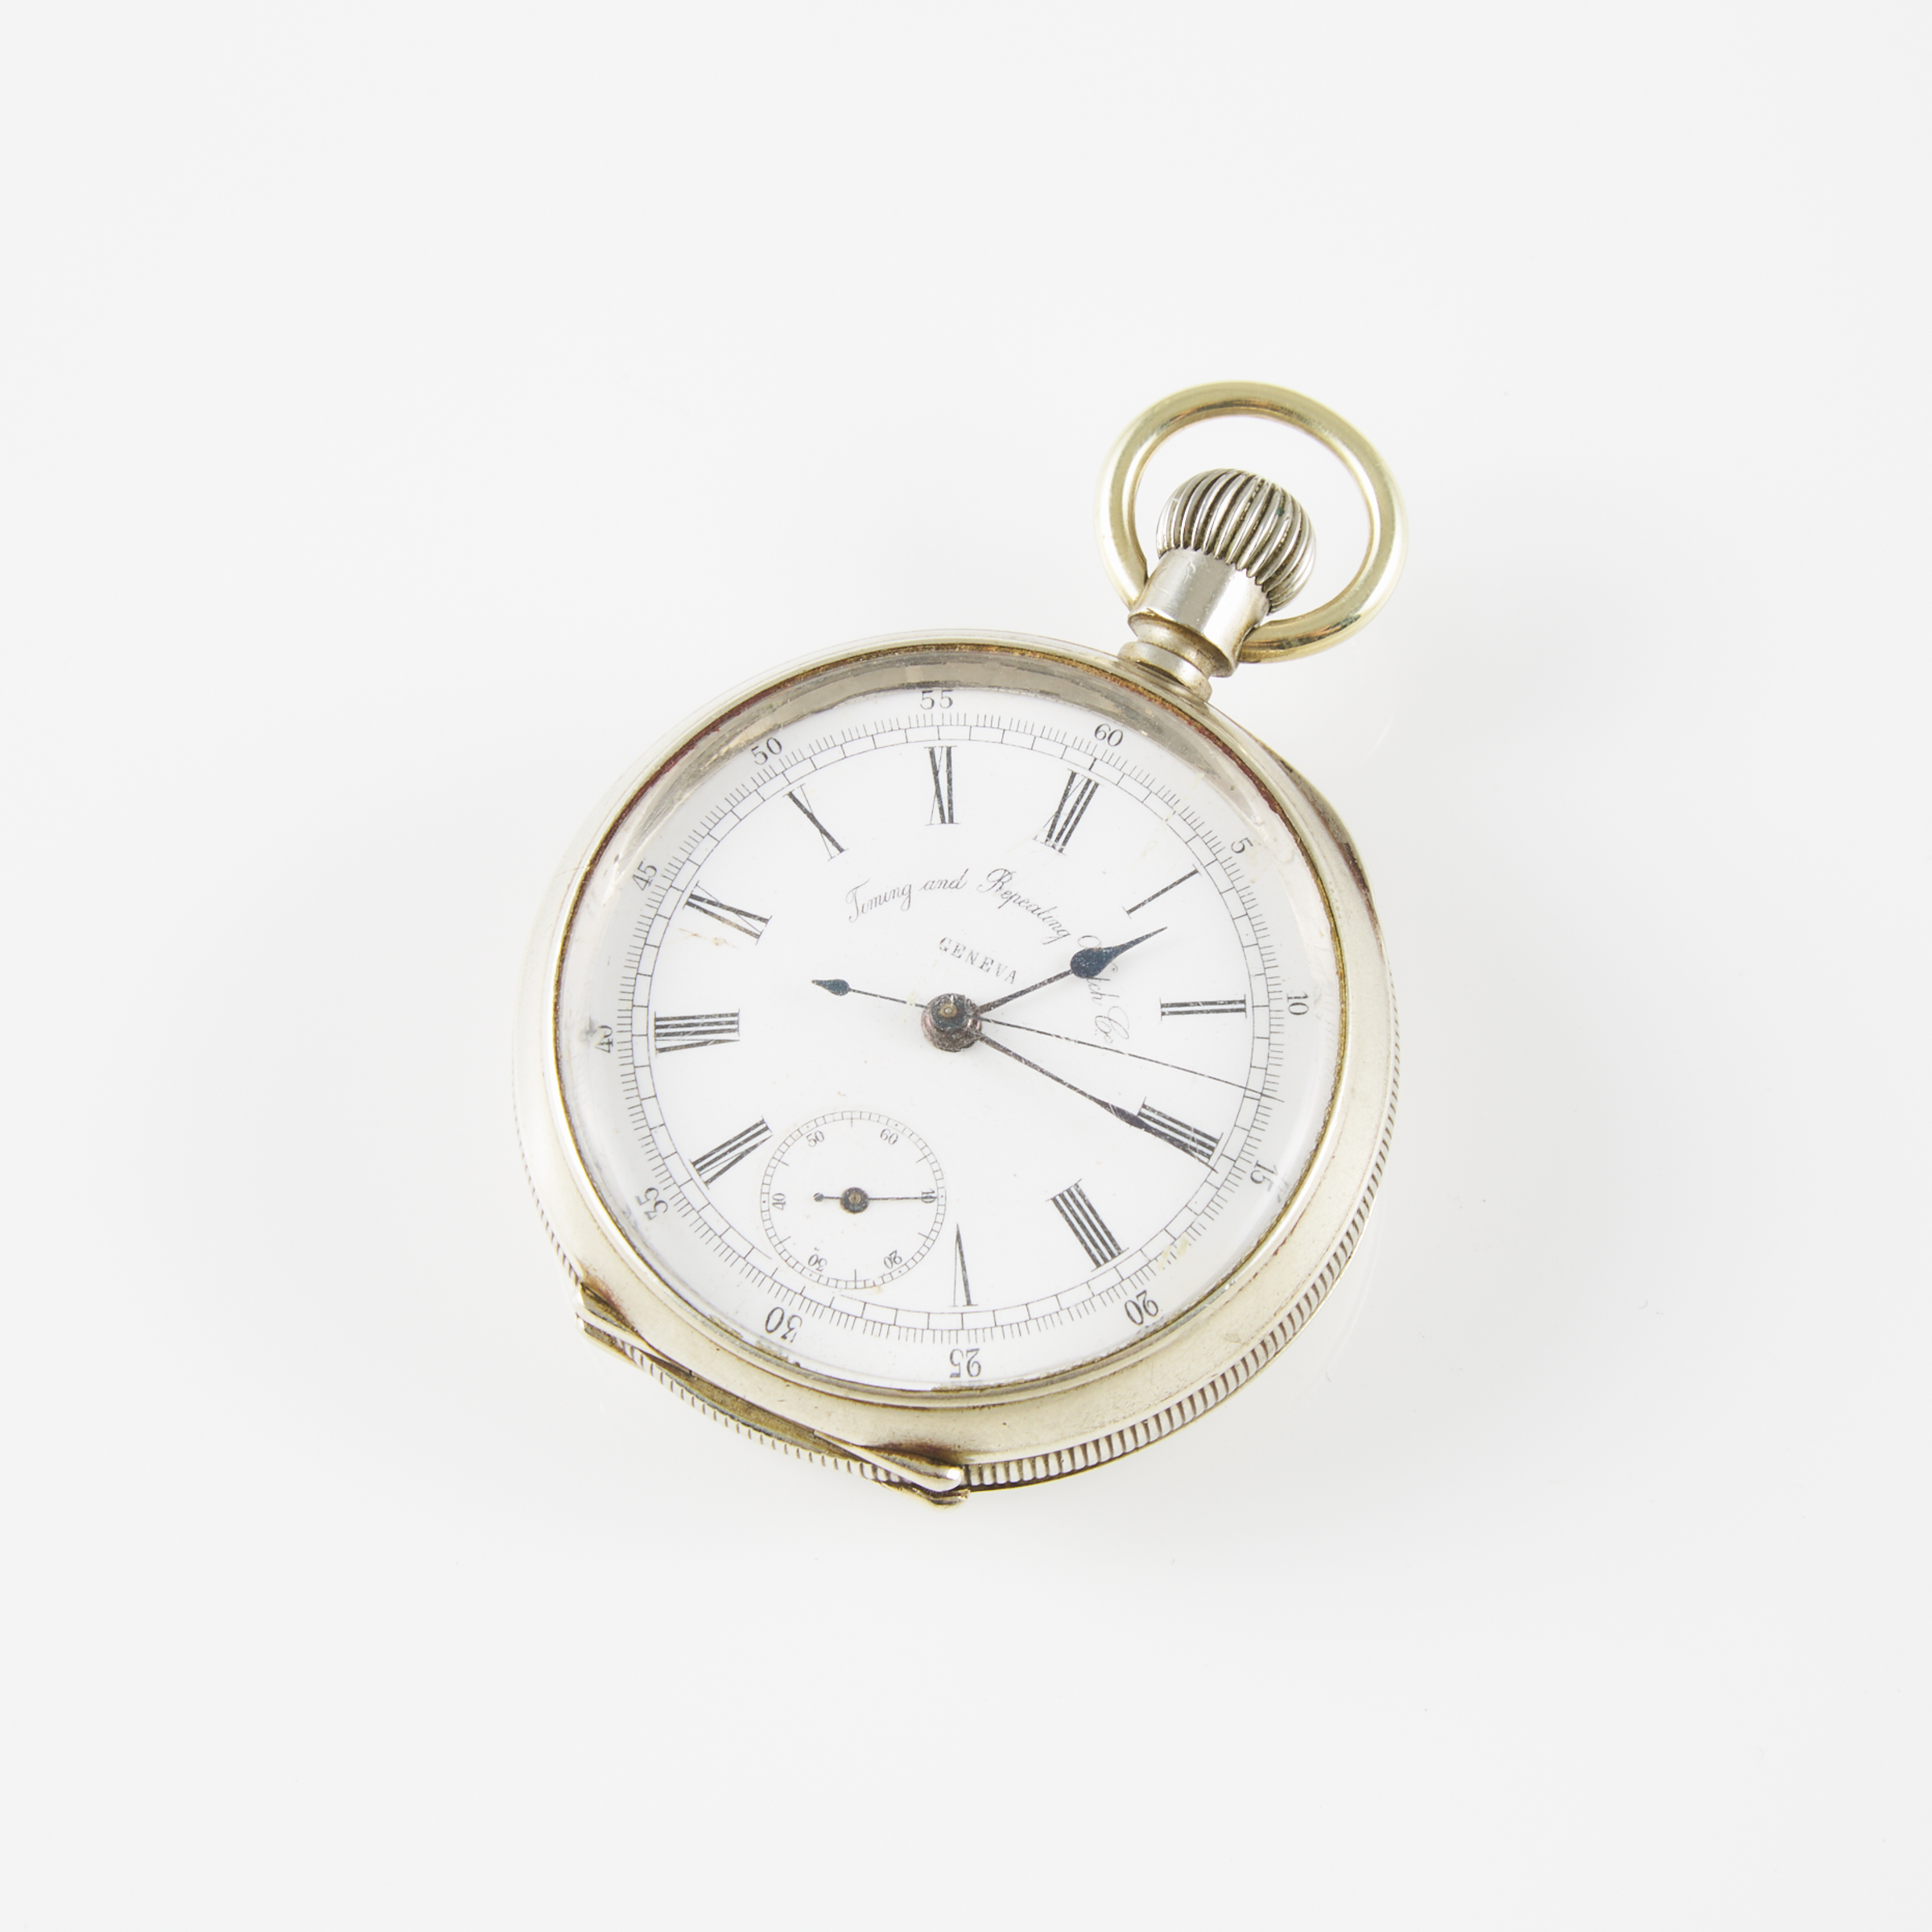 Timing And Repeating Watch Co. Stem Wind Openface Pocket Watch With Chronometer